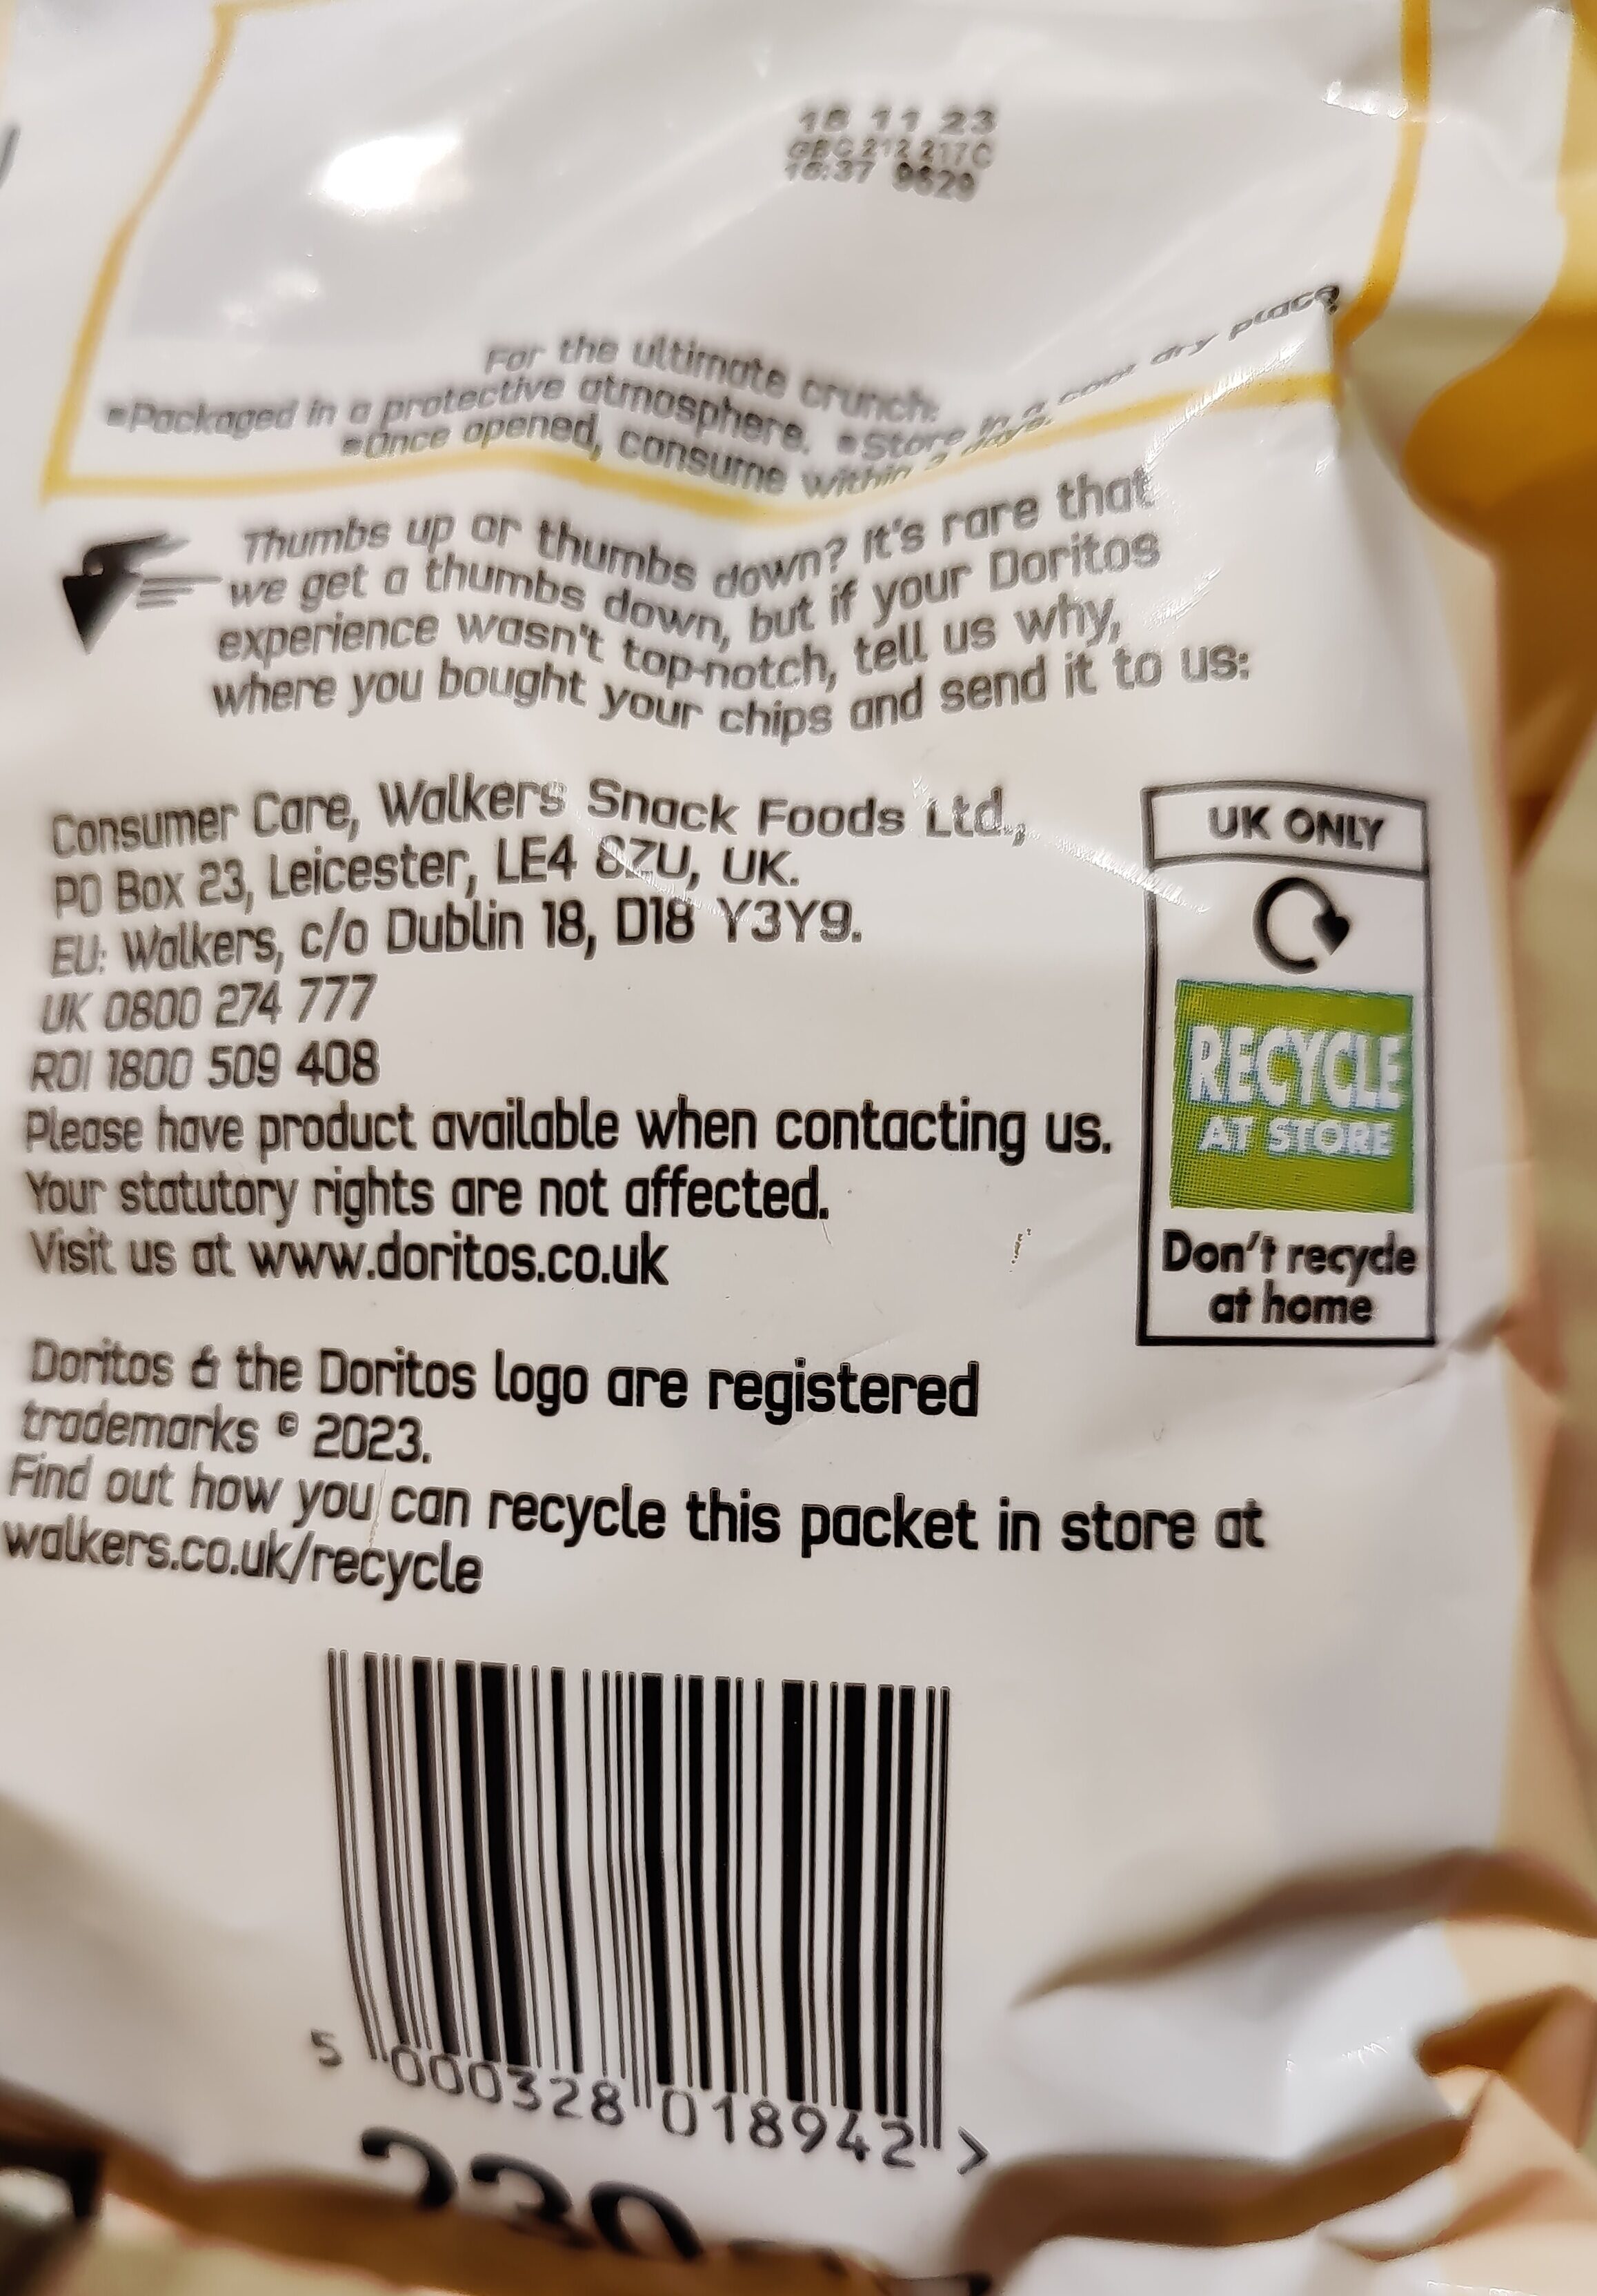 Doritos - Recycling instructions and/or packaging information